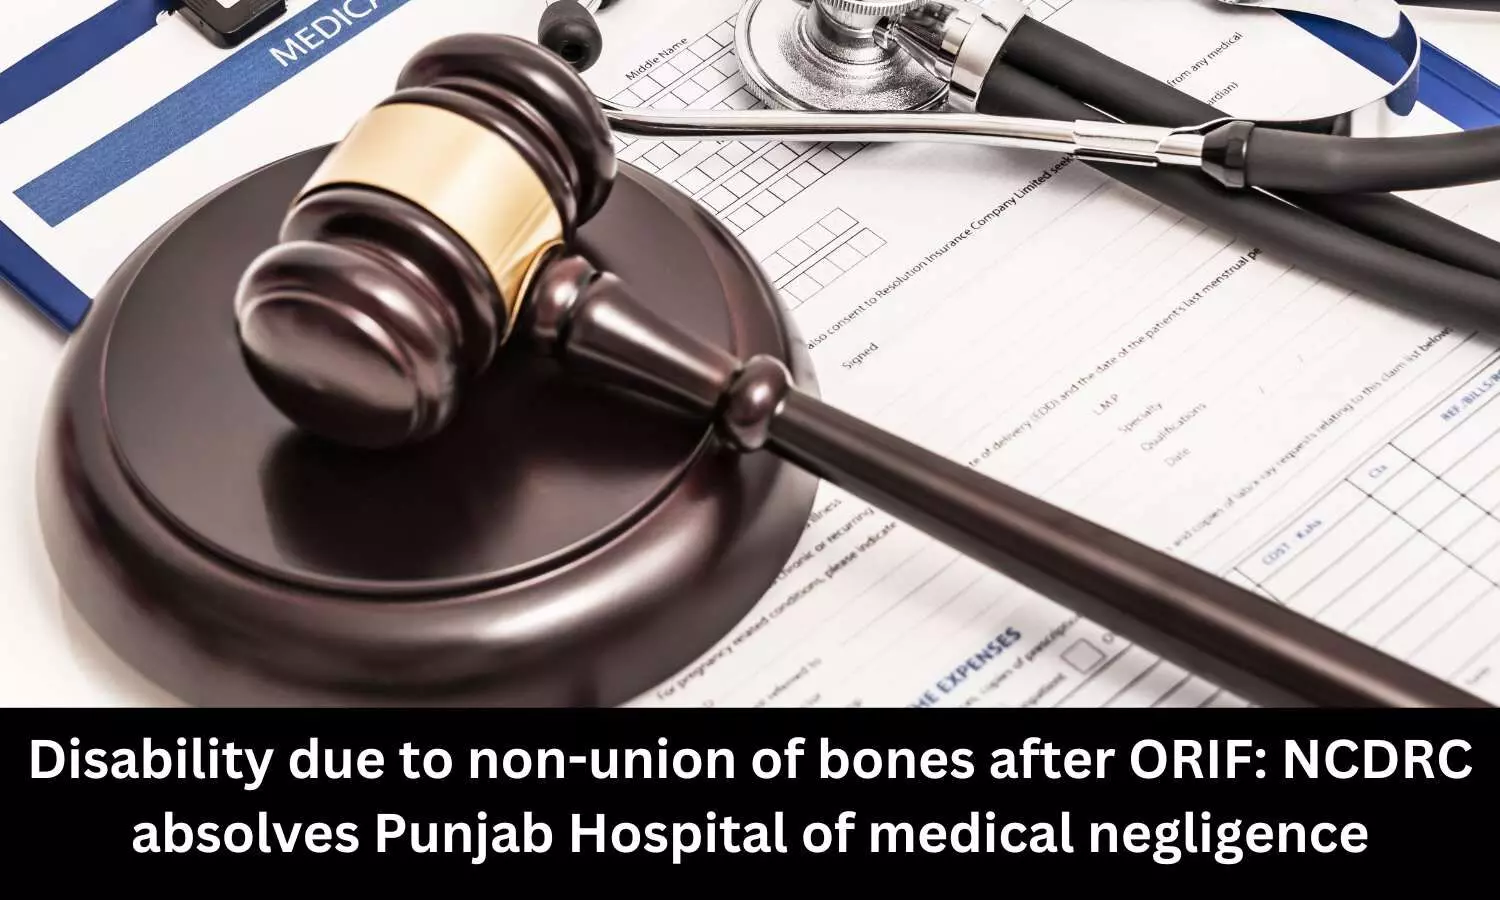 Disability due to non-union of bones after ORIF: NCDRC absolves Punjab Hospital of medical negligence